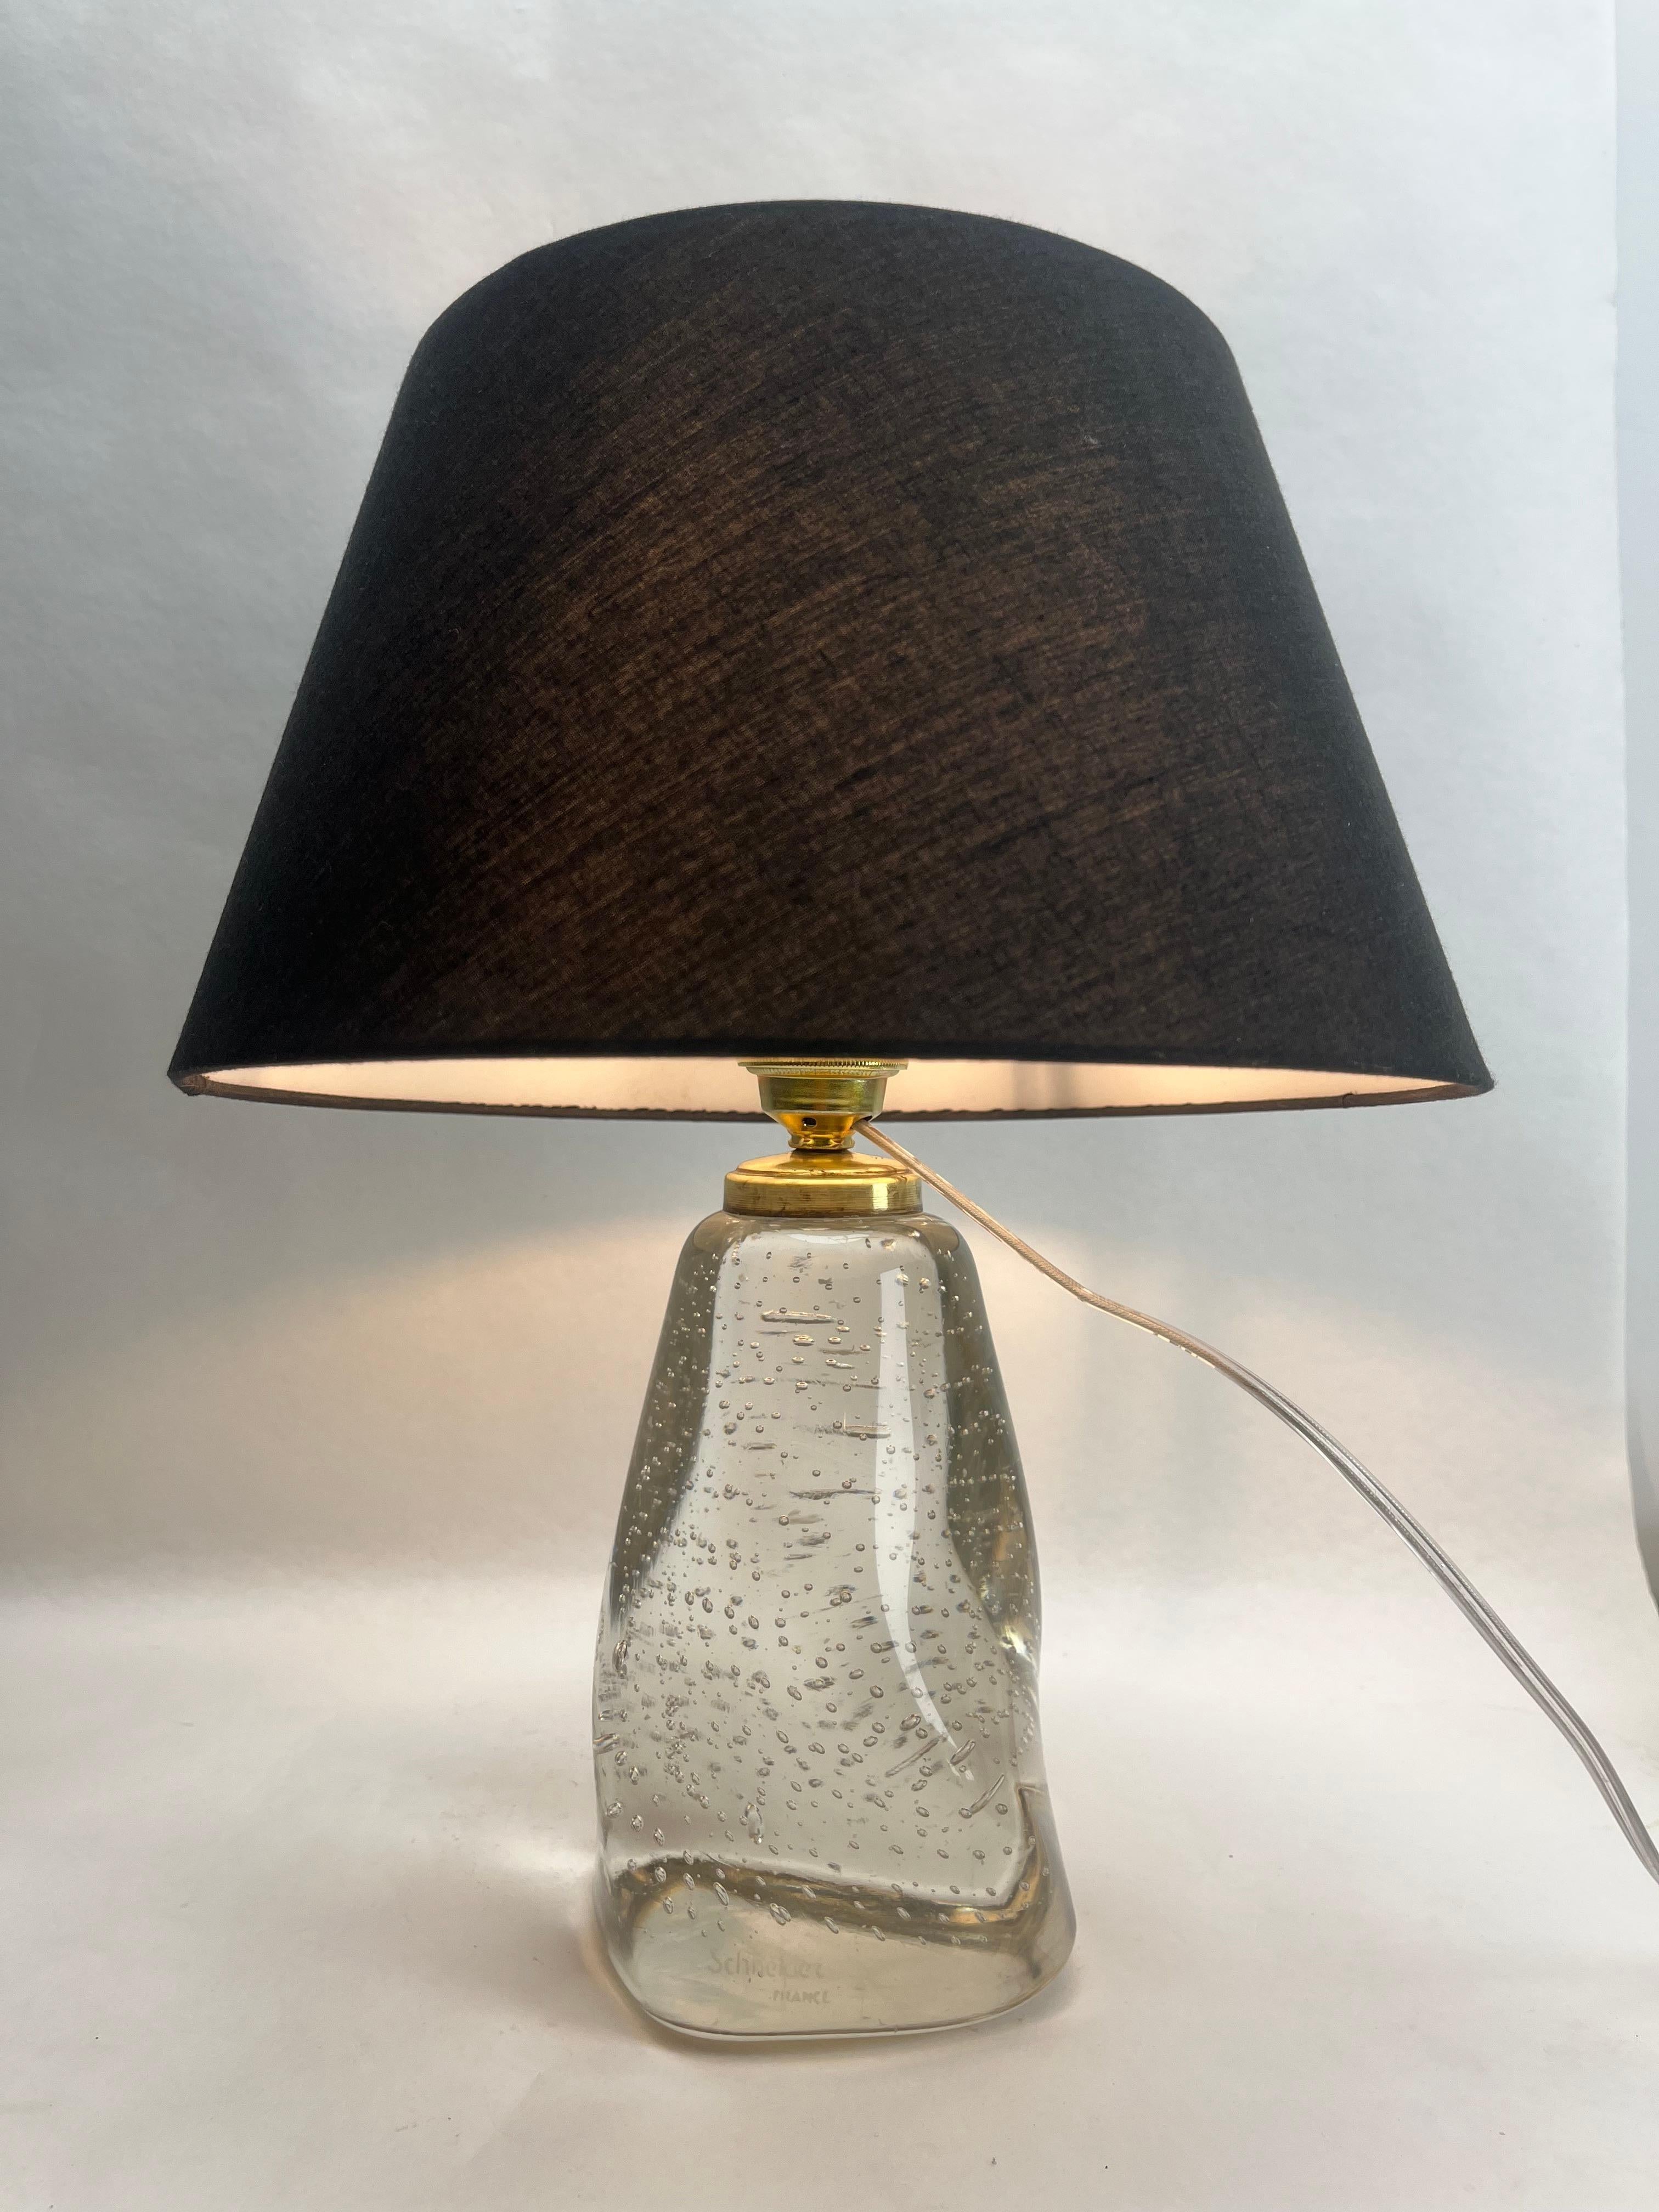 A small free form crystal lamp base made by Cristallerie Schneider in the 1960s. Etched ‘Schneider’ on the base.
Schneider Cristallerie was established in 1918 just outside Paris as a commercial and decorative glassware company founded by brothers